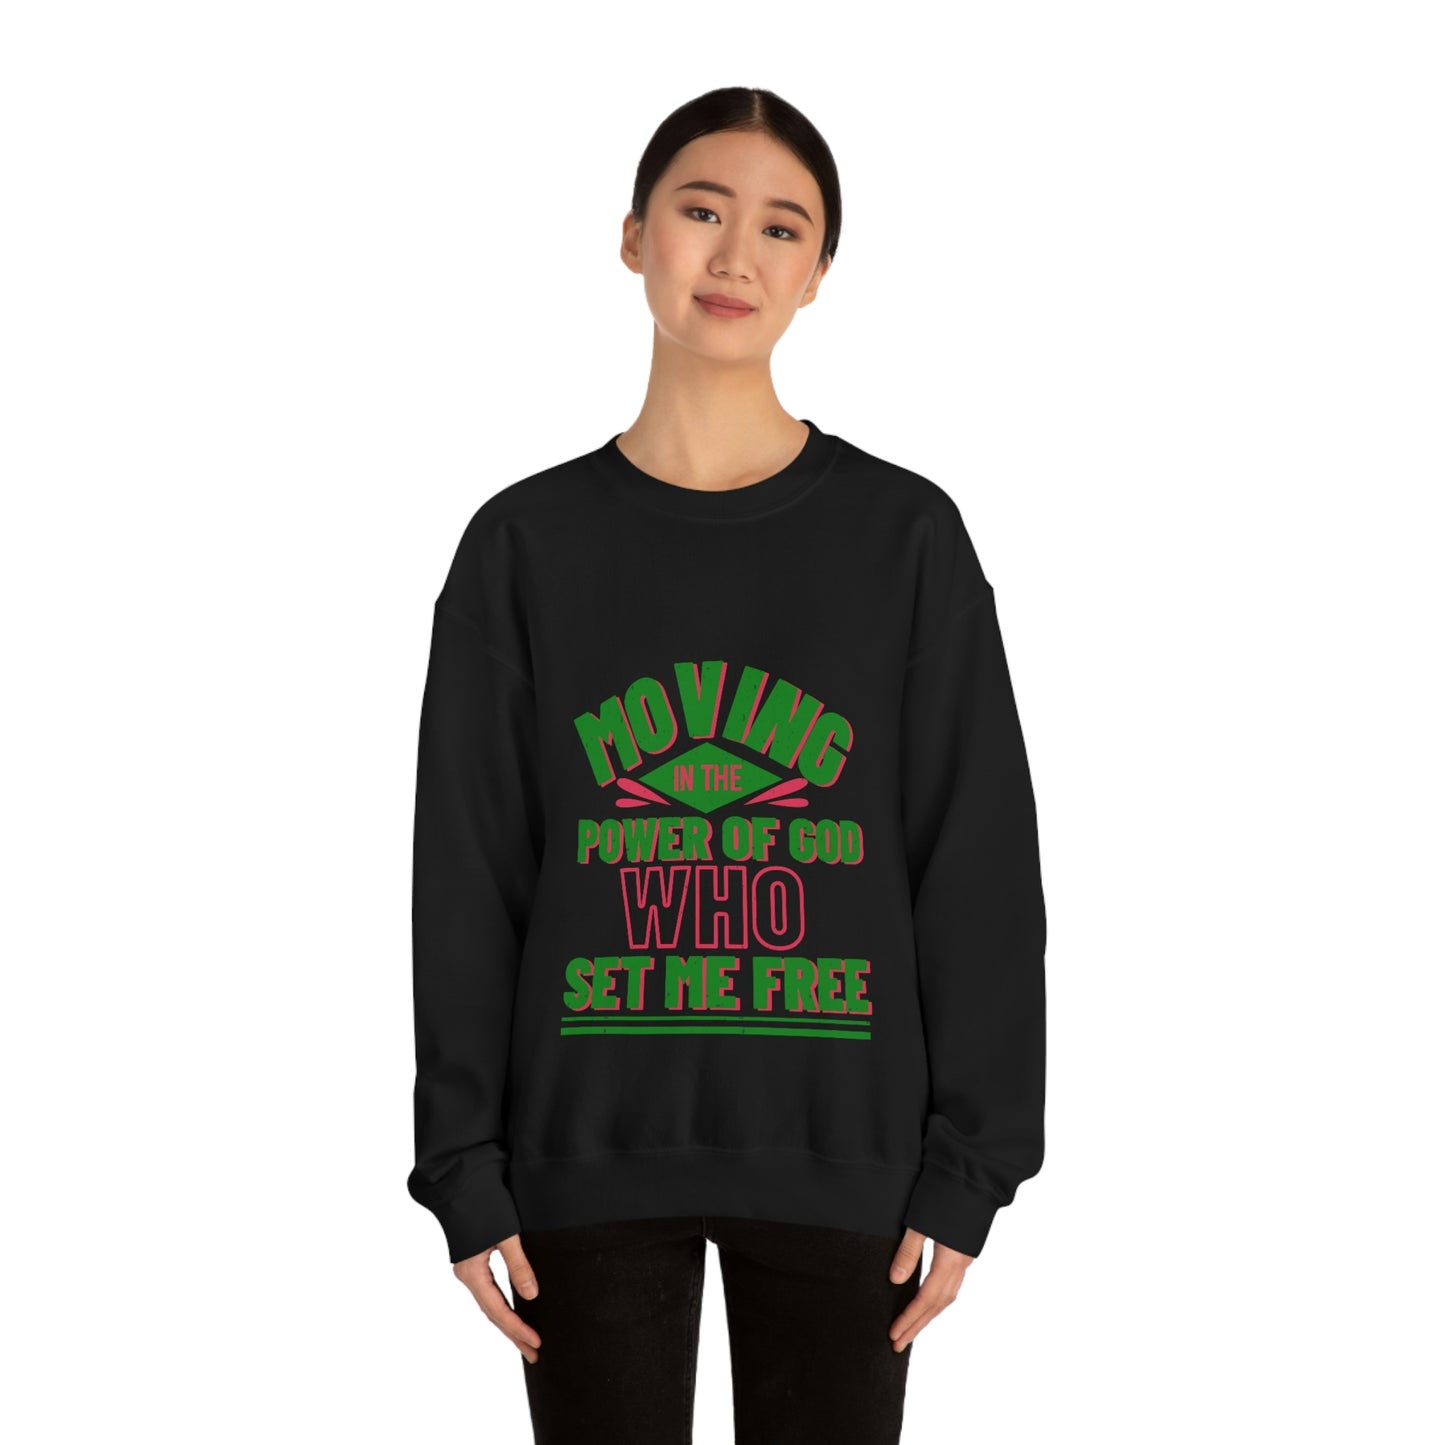 Moving In The Power Of God Who Set Me Free Unisex Heavy Blend™ Crewneck Sweatshirt